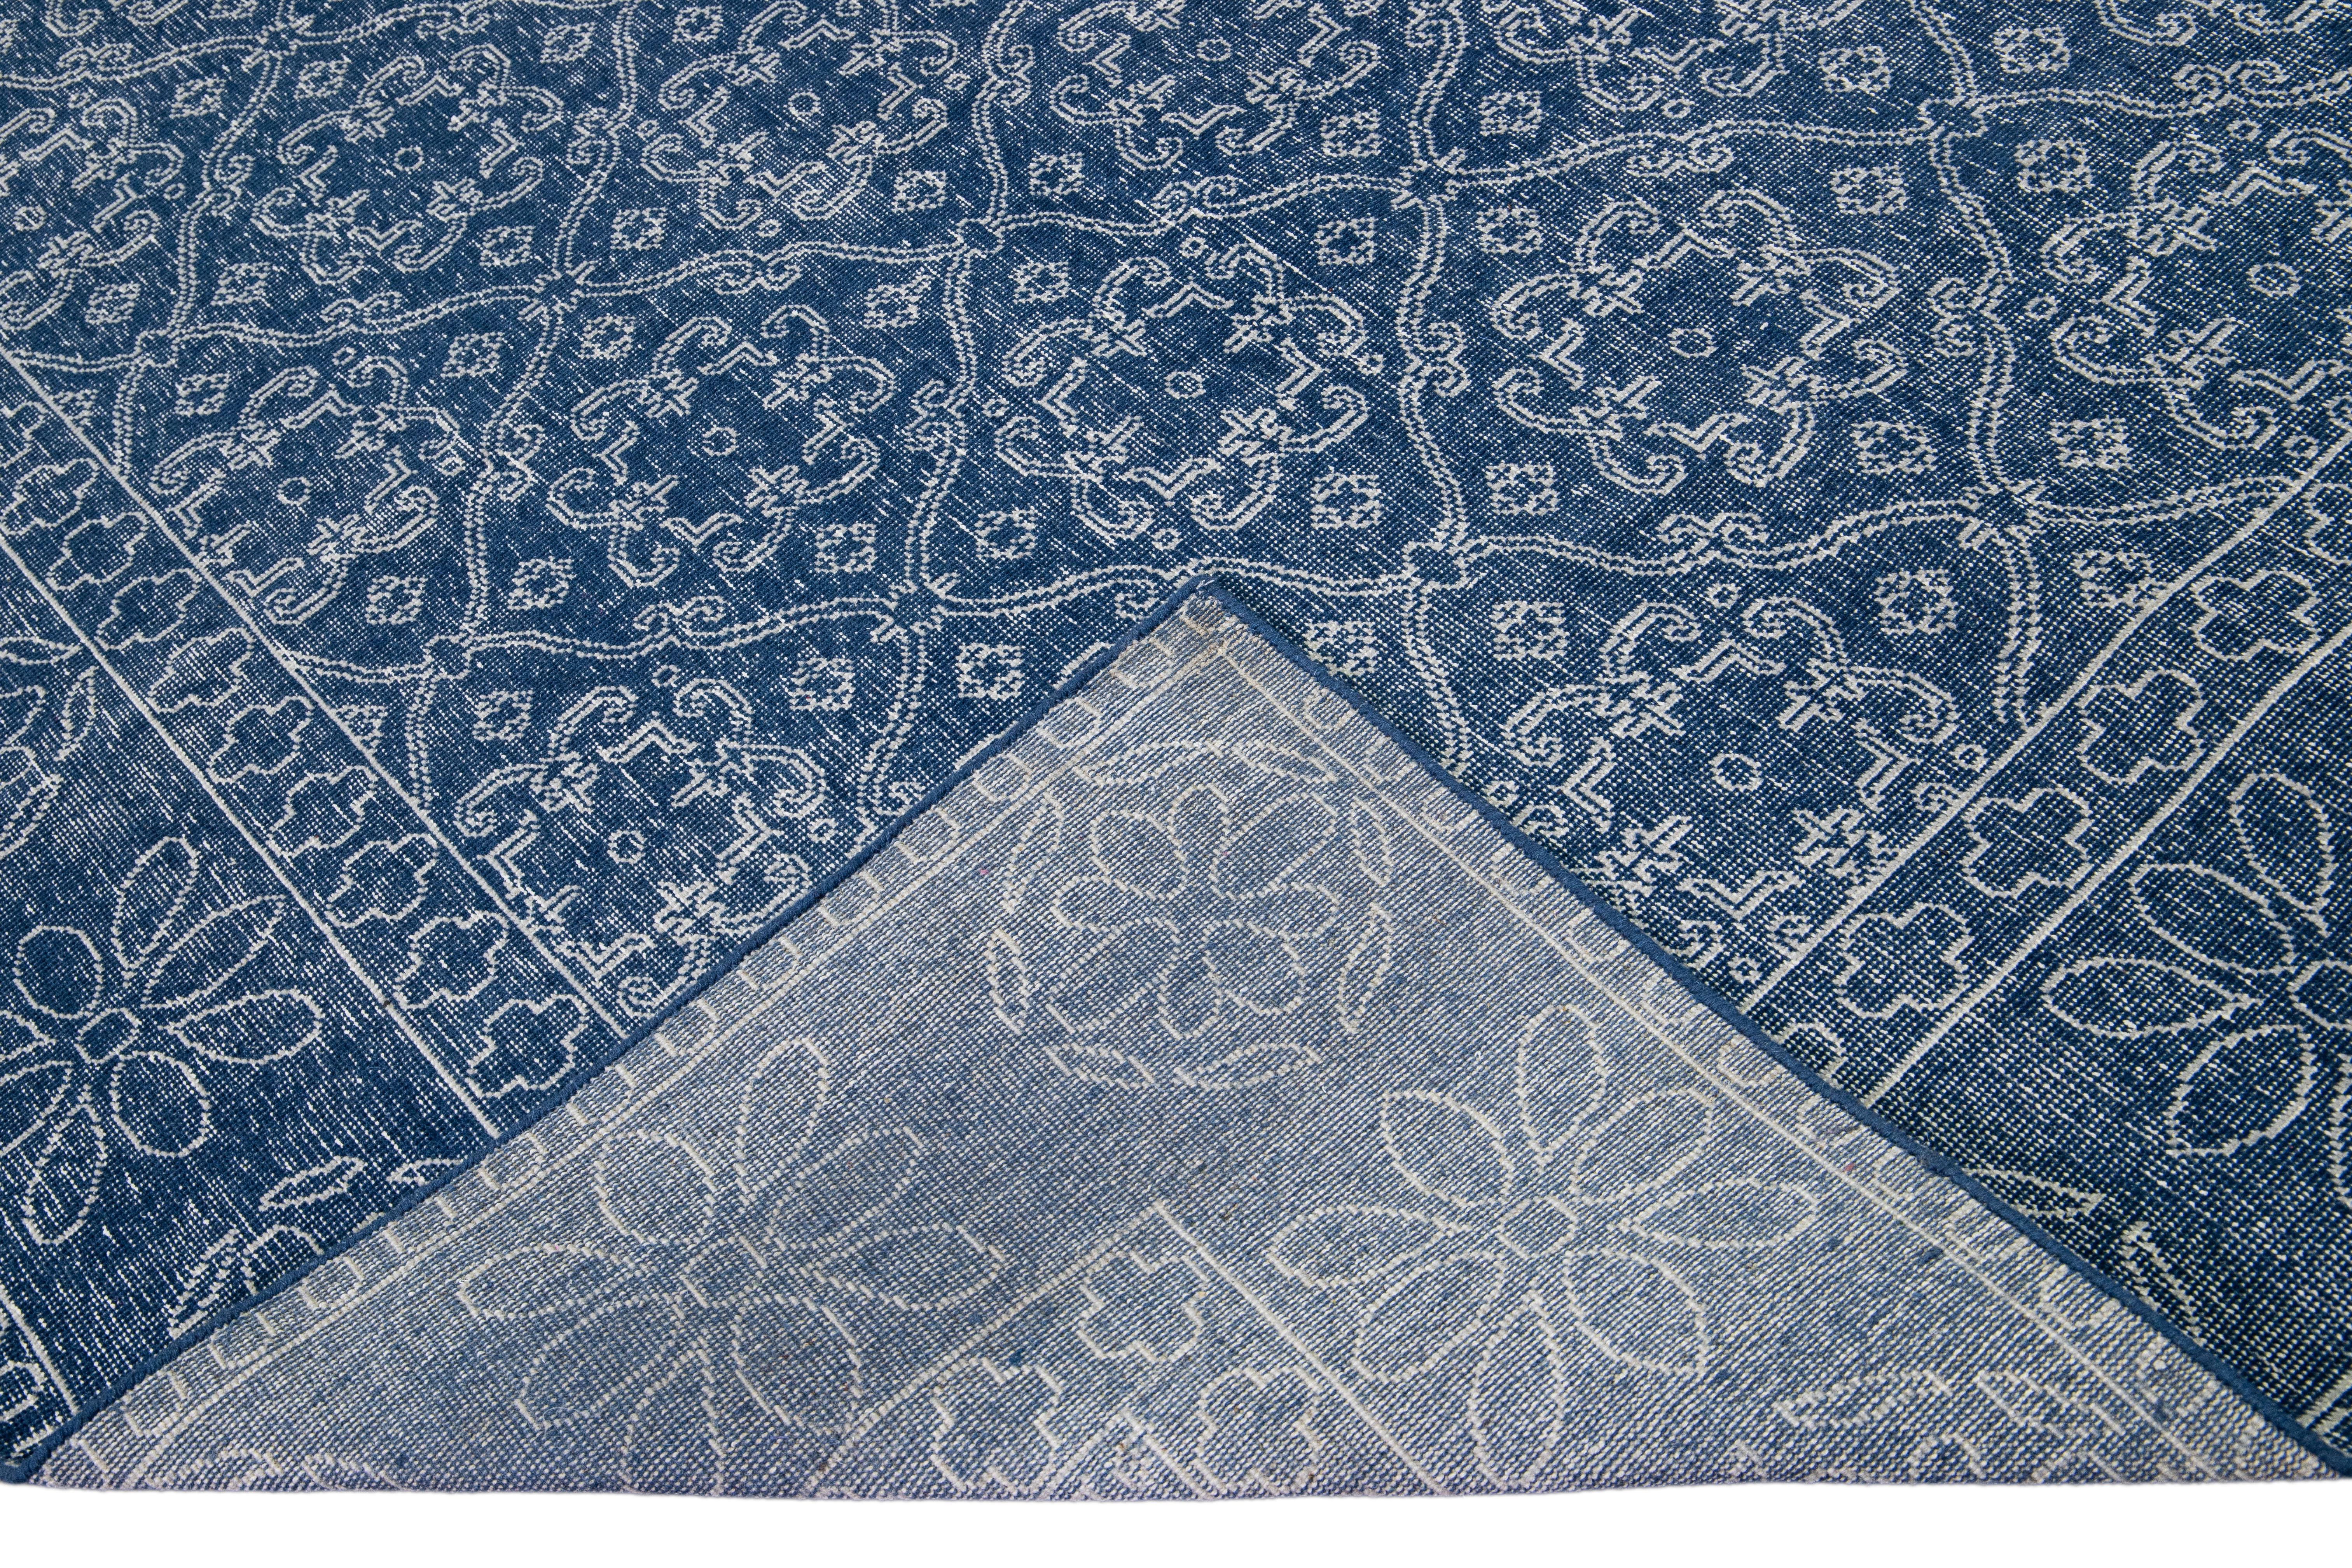 Beautiful Turkish handmade wool rug with a blue distress look field. This Modern rug has white accents featuring a gorgeous all-over floral trellis design.

This rug measures: 9' x 12'.

Our rugs are professional cleaning before shipping.